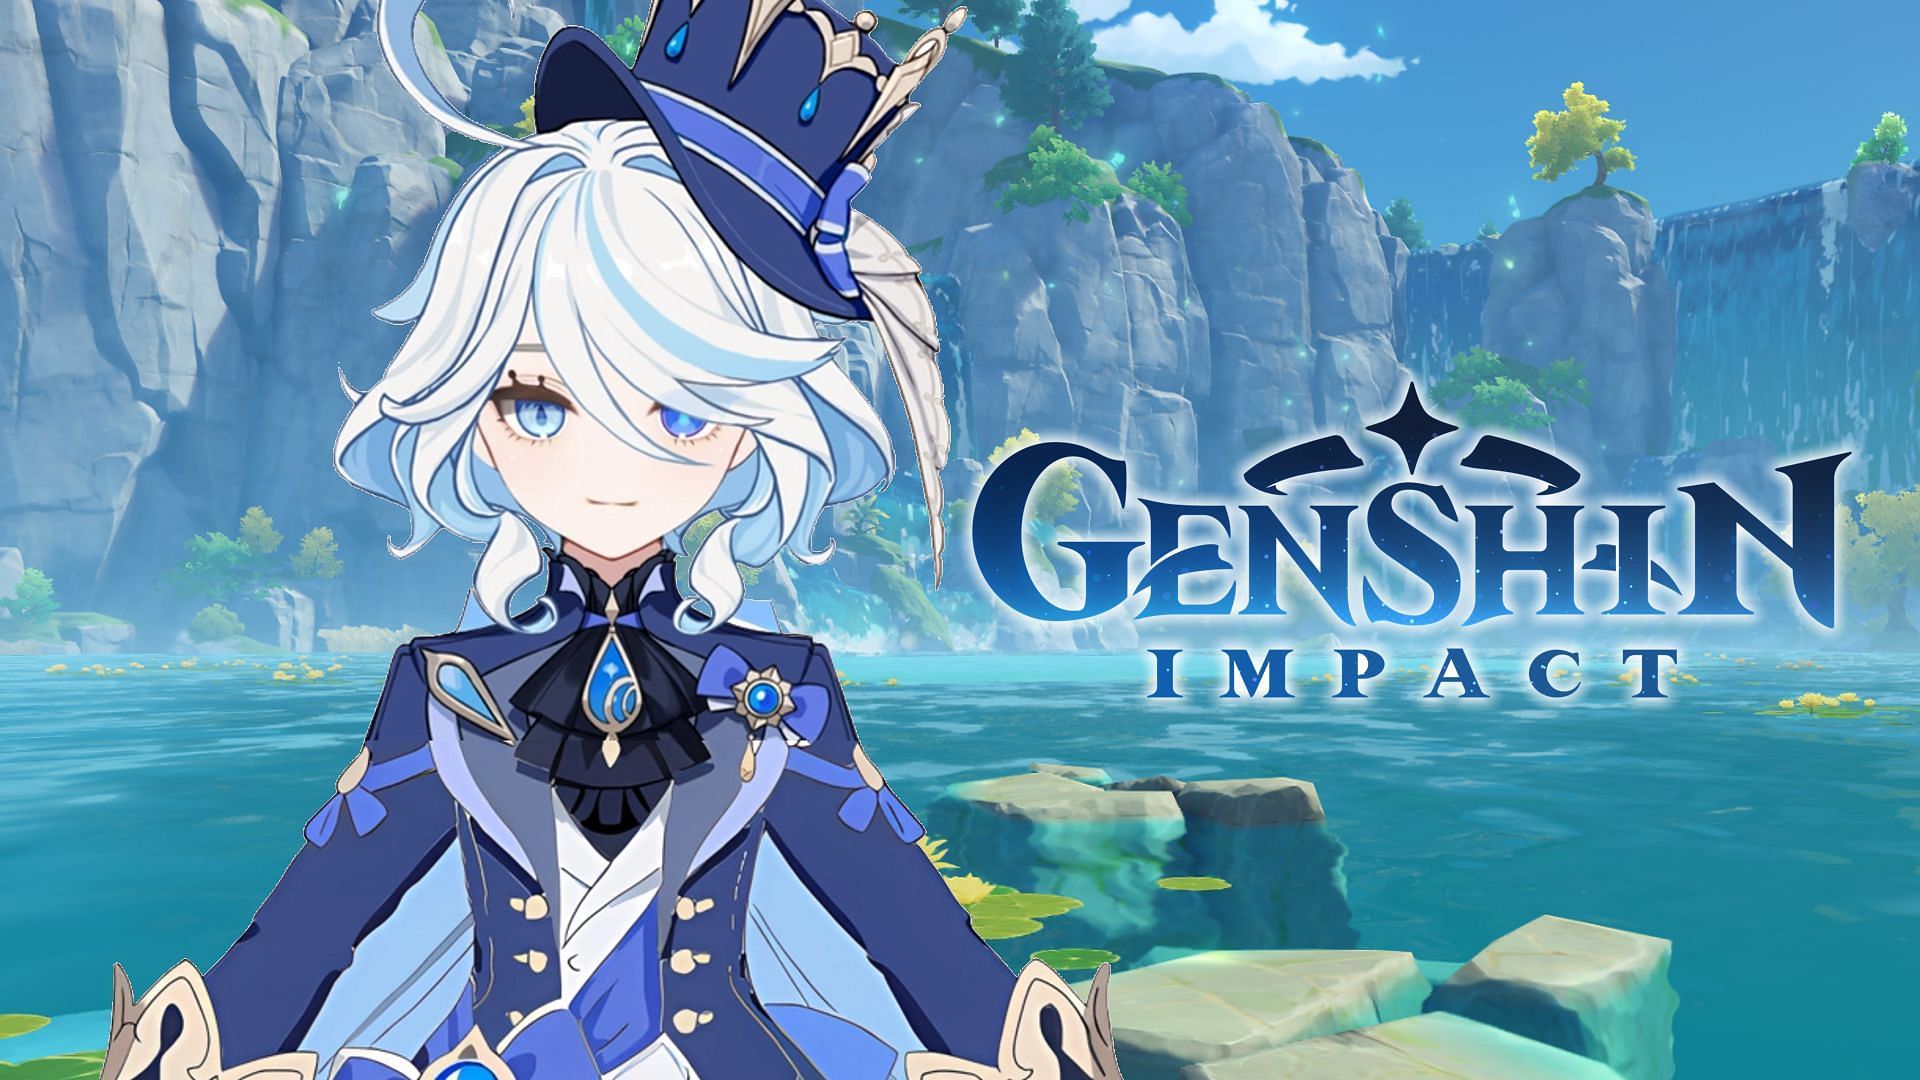 Genshin Impact 4.0 Fontaine: Release Date, Leaks & Characters